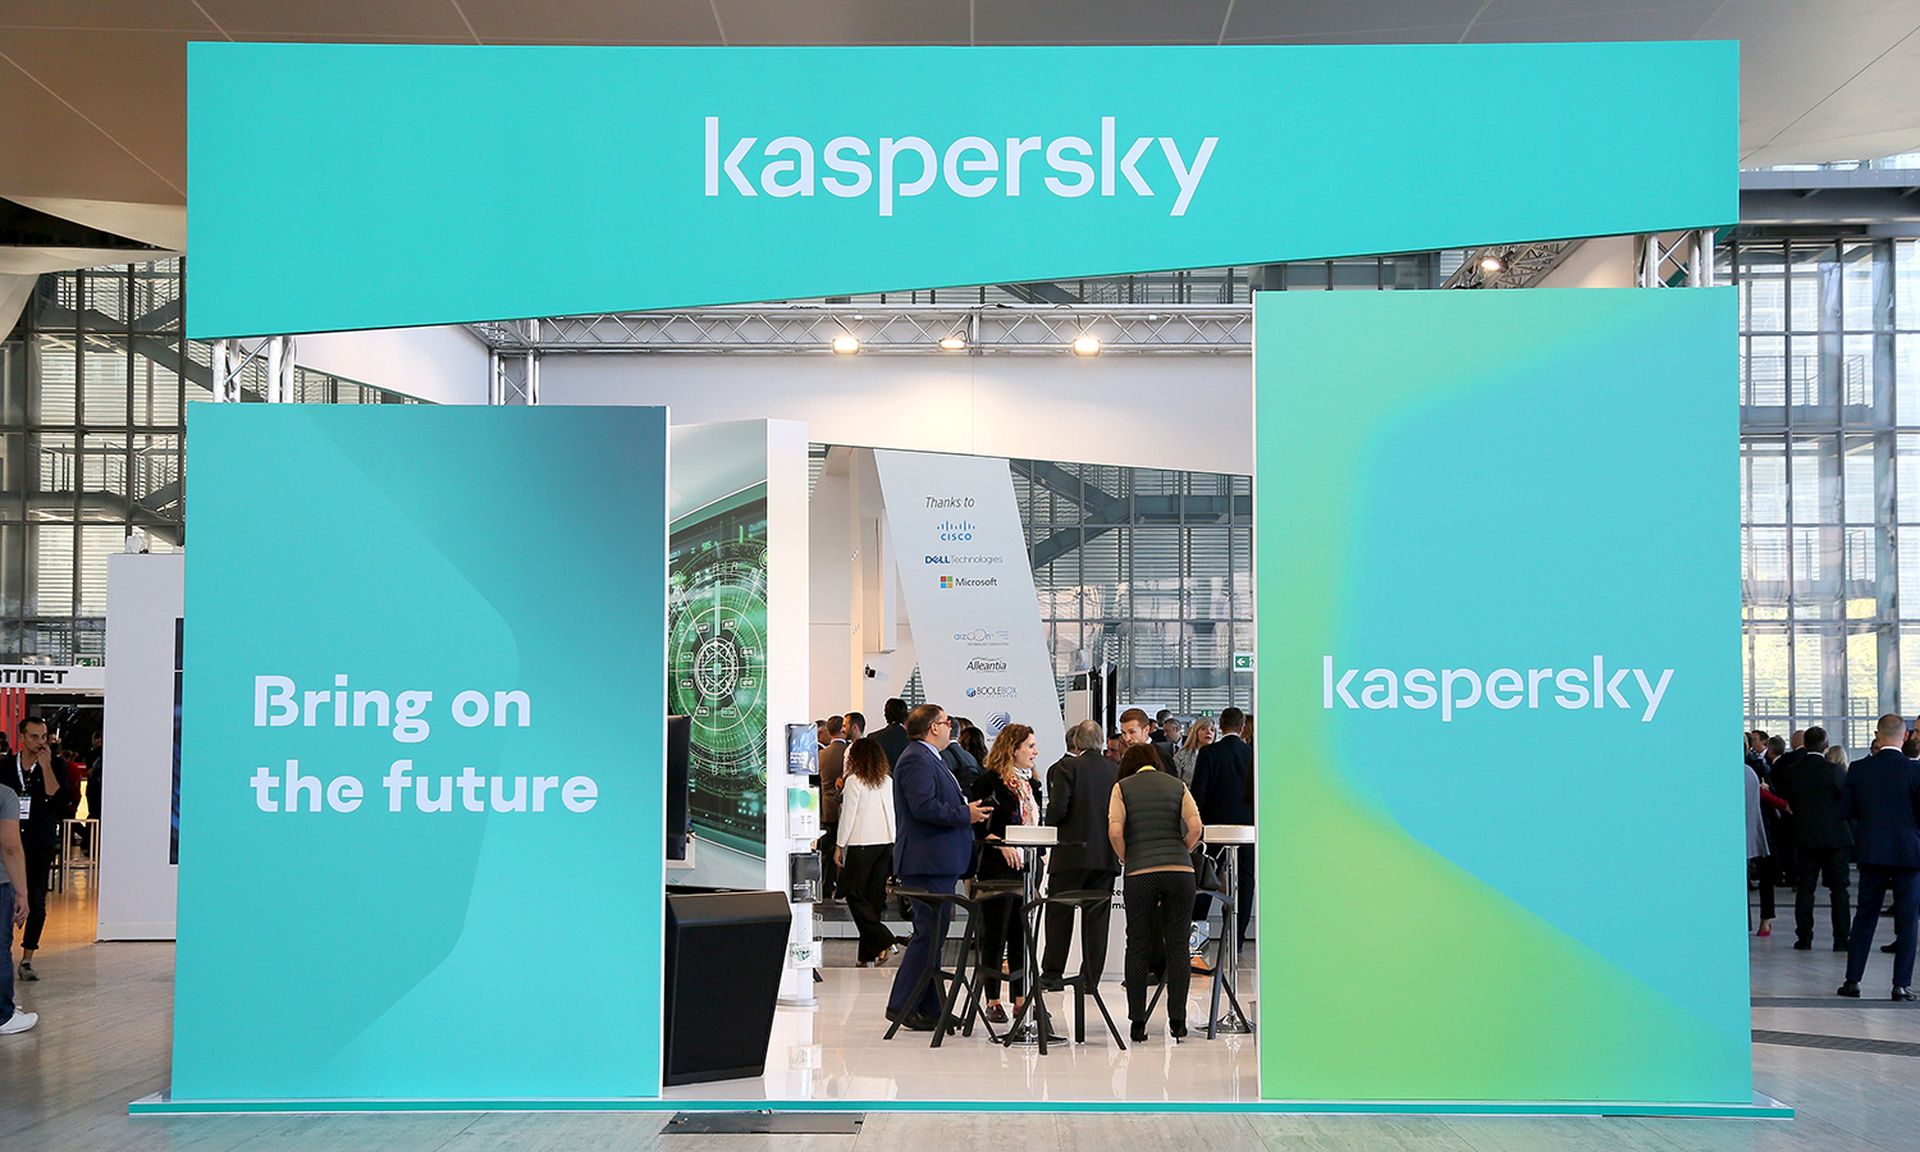 The Kaspersky booth is seen during Cybertech Europe 2019 on Sept. 24, 2019, in Rome. (Photo by Ernesto S. Ruscio/Getty Images)